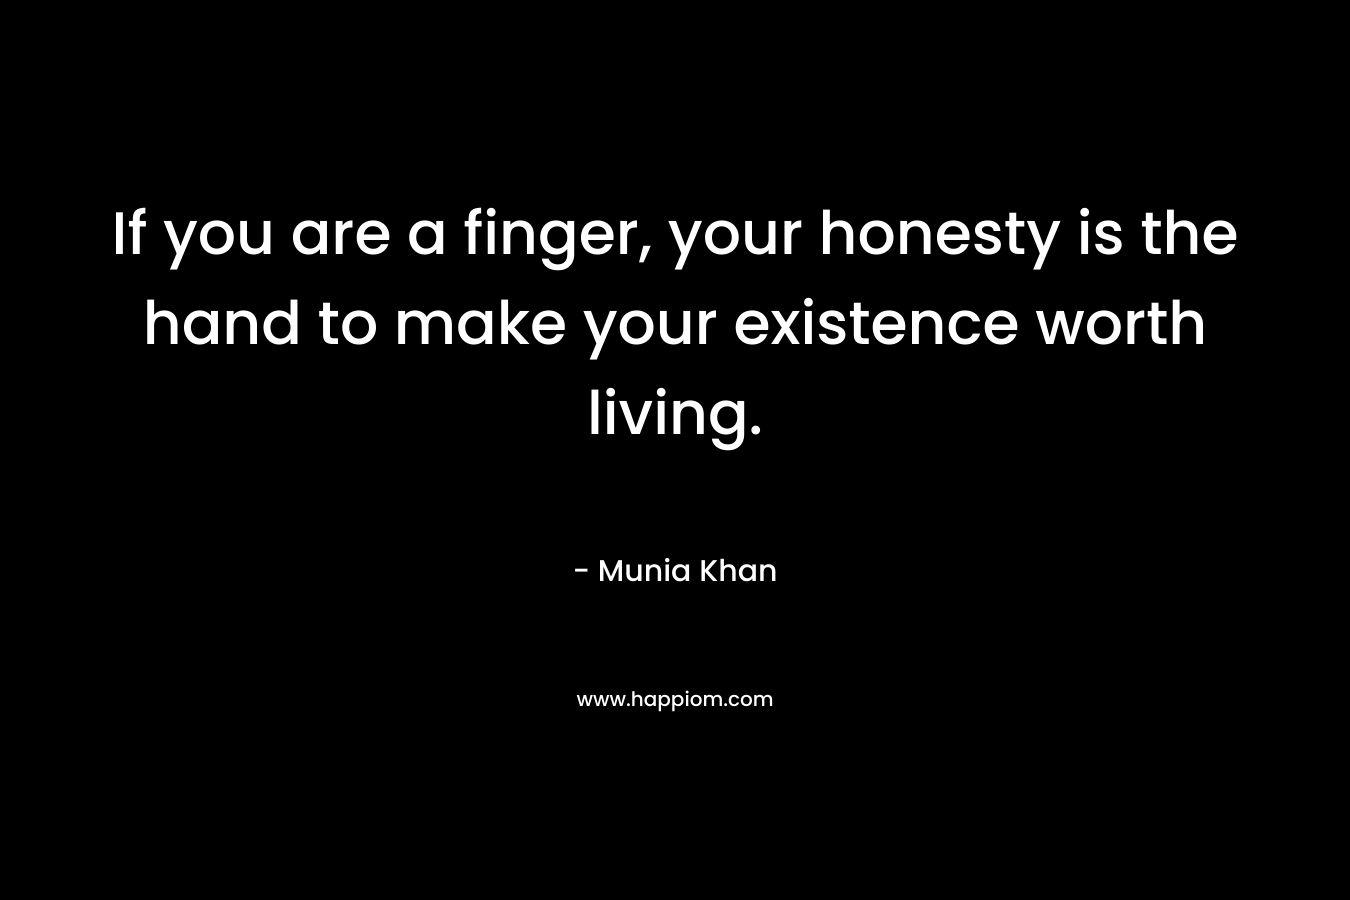 If you are a finger, your honesty is the hand to make your existence worth living.